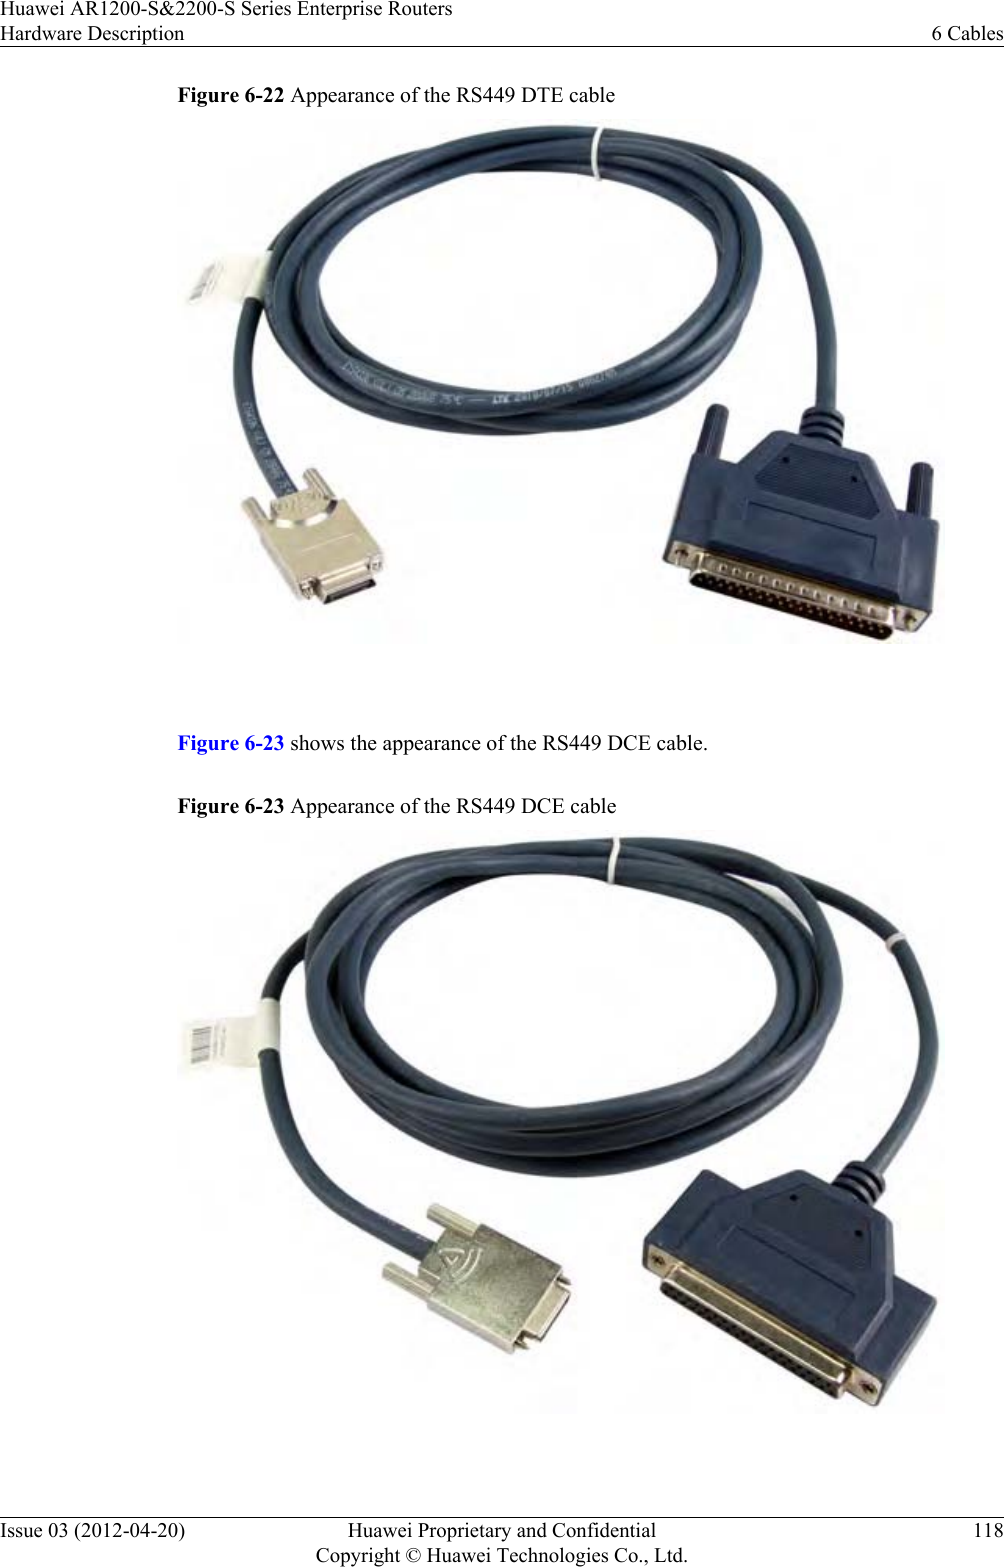 Figure 6-22 Appearance of the RS449 DTE cable Figure 6-23 shows the appearance of the RS449 DCE cable.Figure 6-23 Appearance of the RS449 DCE cable Huawei AR1200-S&amp;2200-S Series Enterprise RoutersHardware Description 6 CablesIssue 03 (2012-04-20) Huawei Proprietary and ConfidentialCopyright © Huawei Technologies Co., Ltd.118